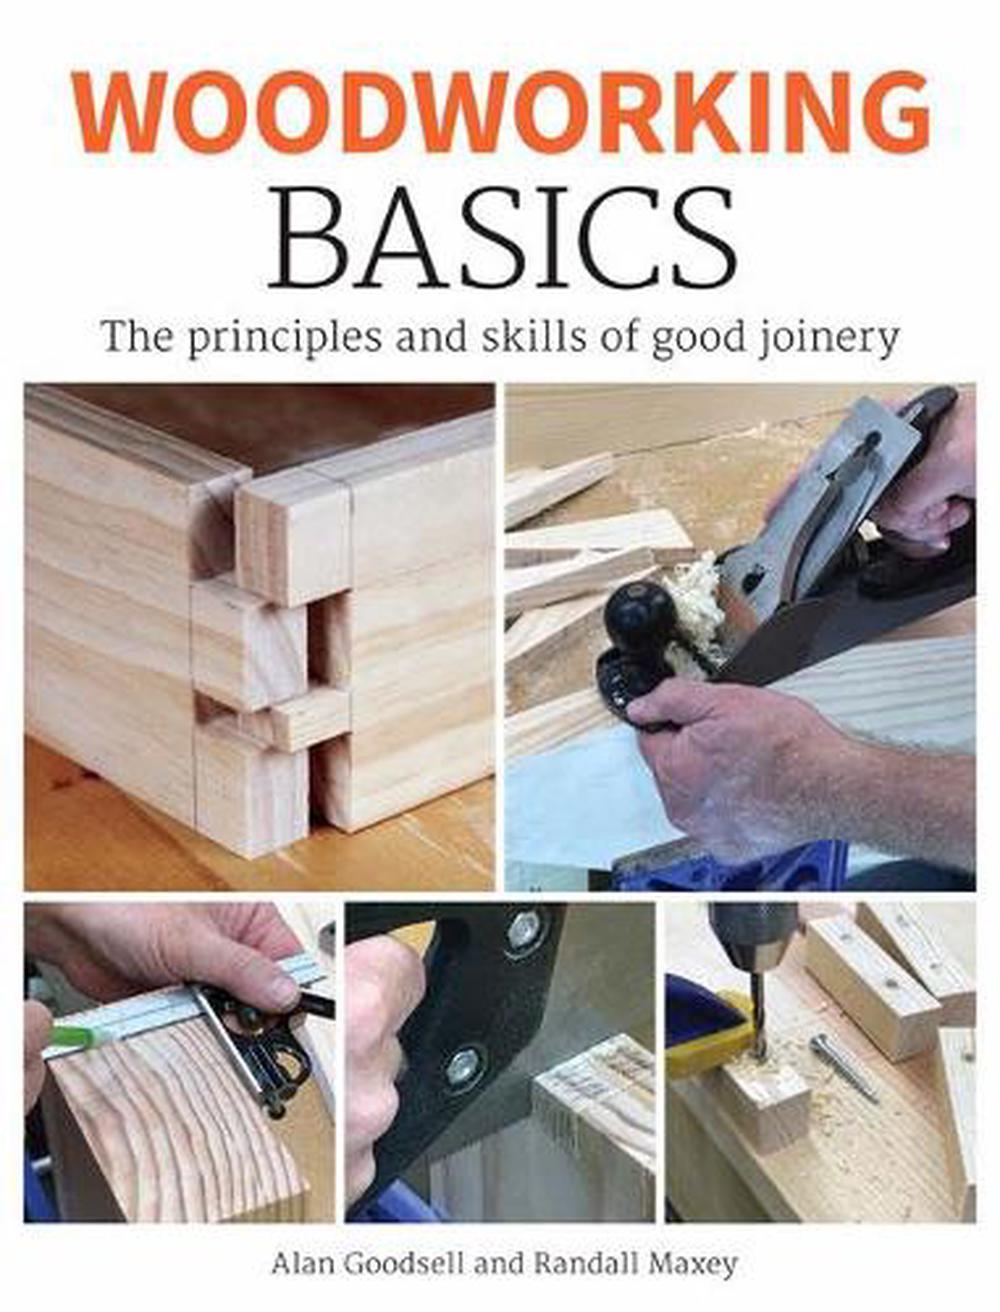 Woodworking Basics: The Principles and Skills of Good Joinery by Alan